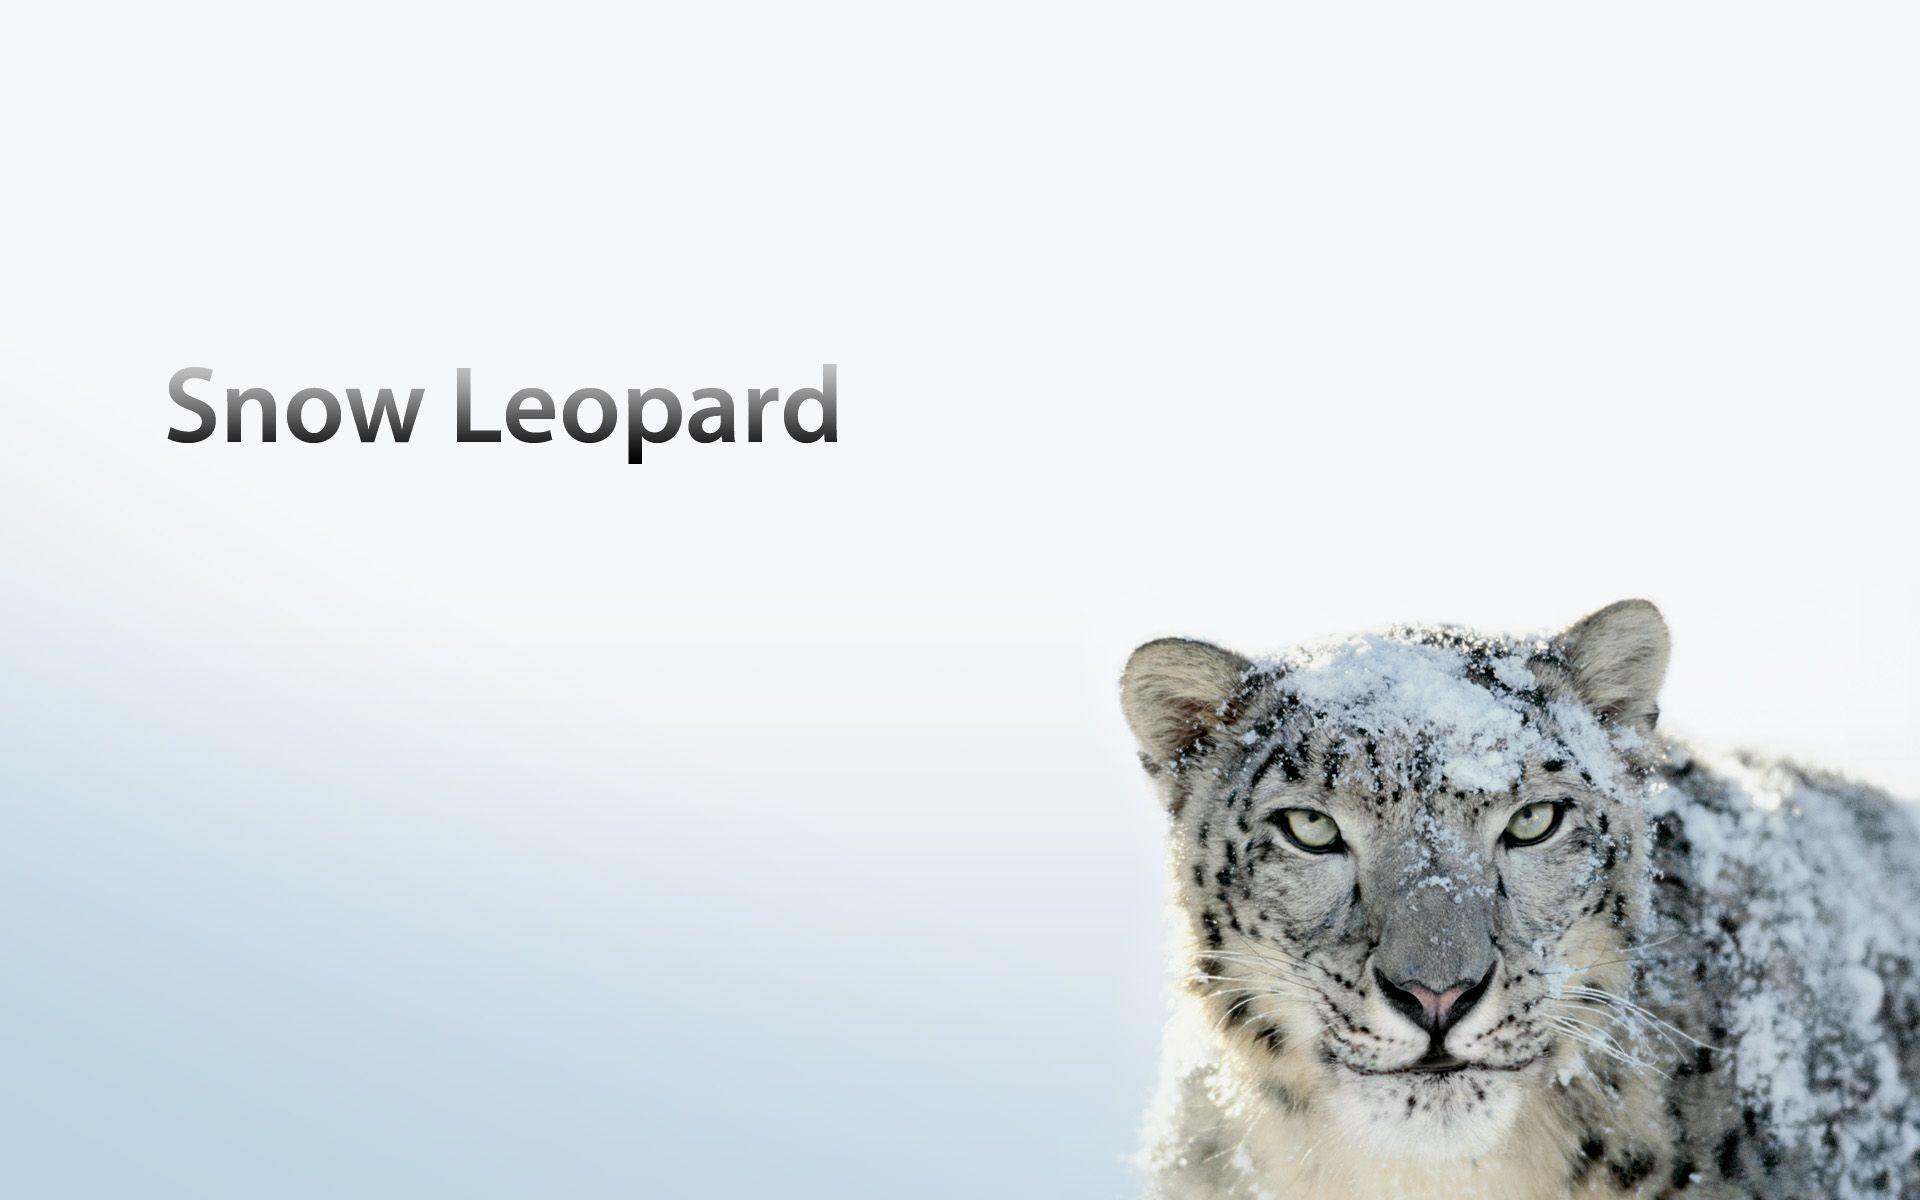 Snow Leopard Wallpapers by jasonh1234